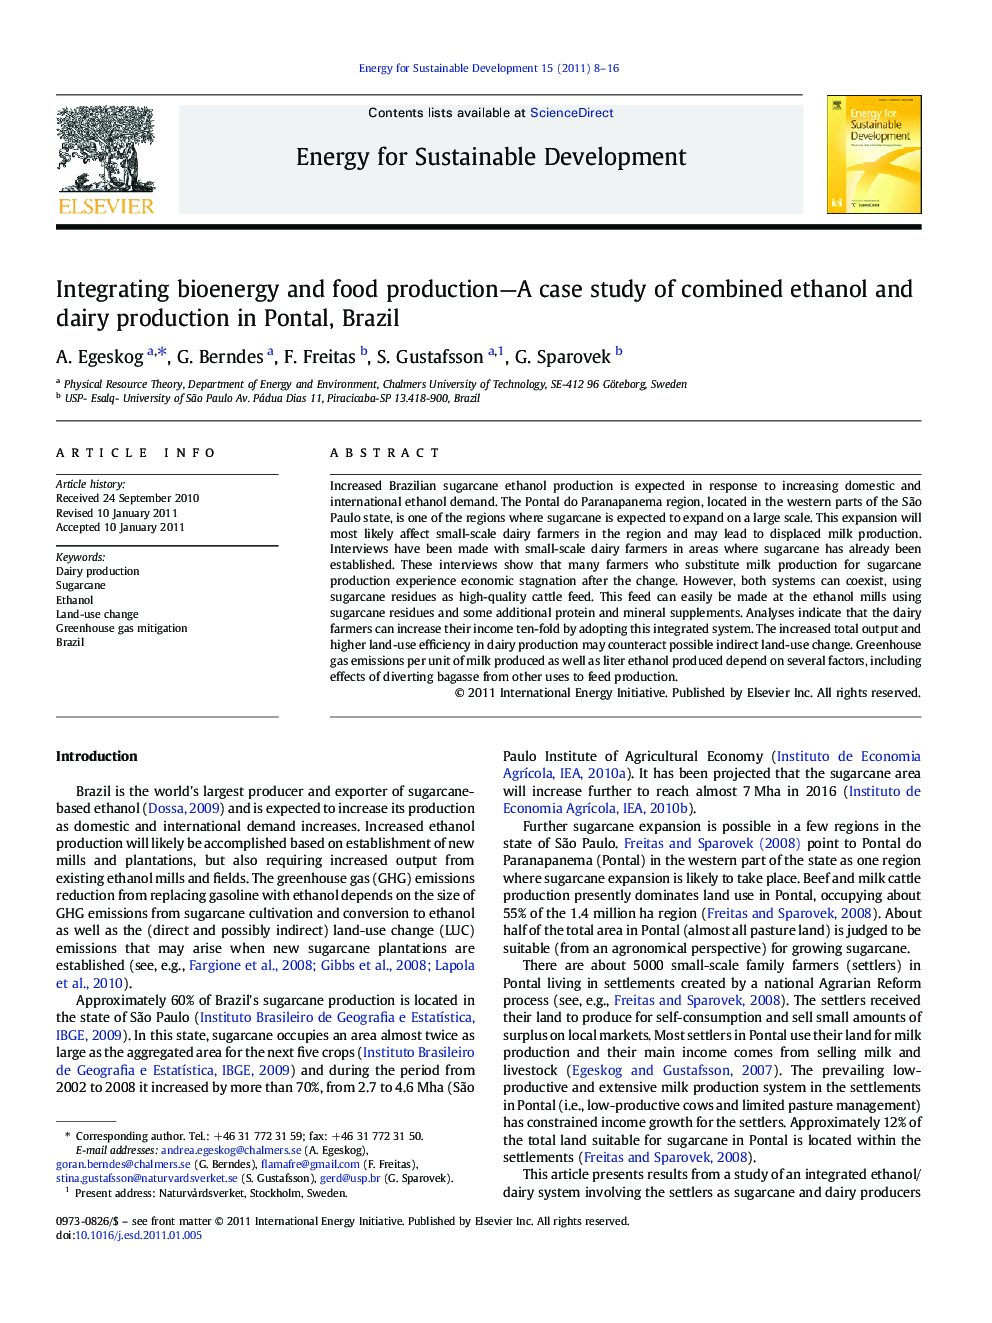 Integrating bioenergy and food production—A case study of combined ethanol and dairy production in Pontal, Brazil